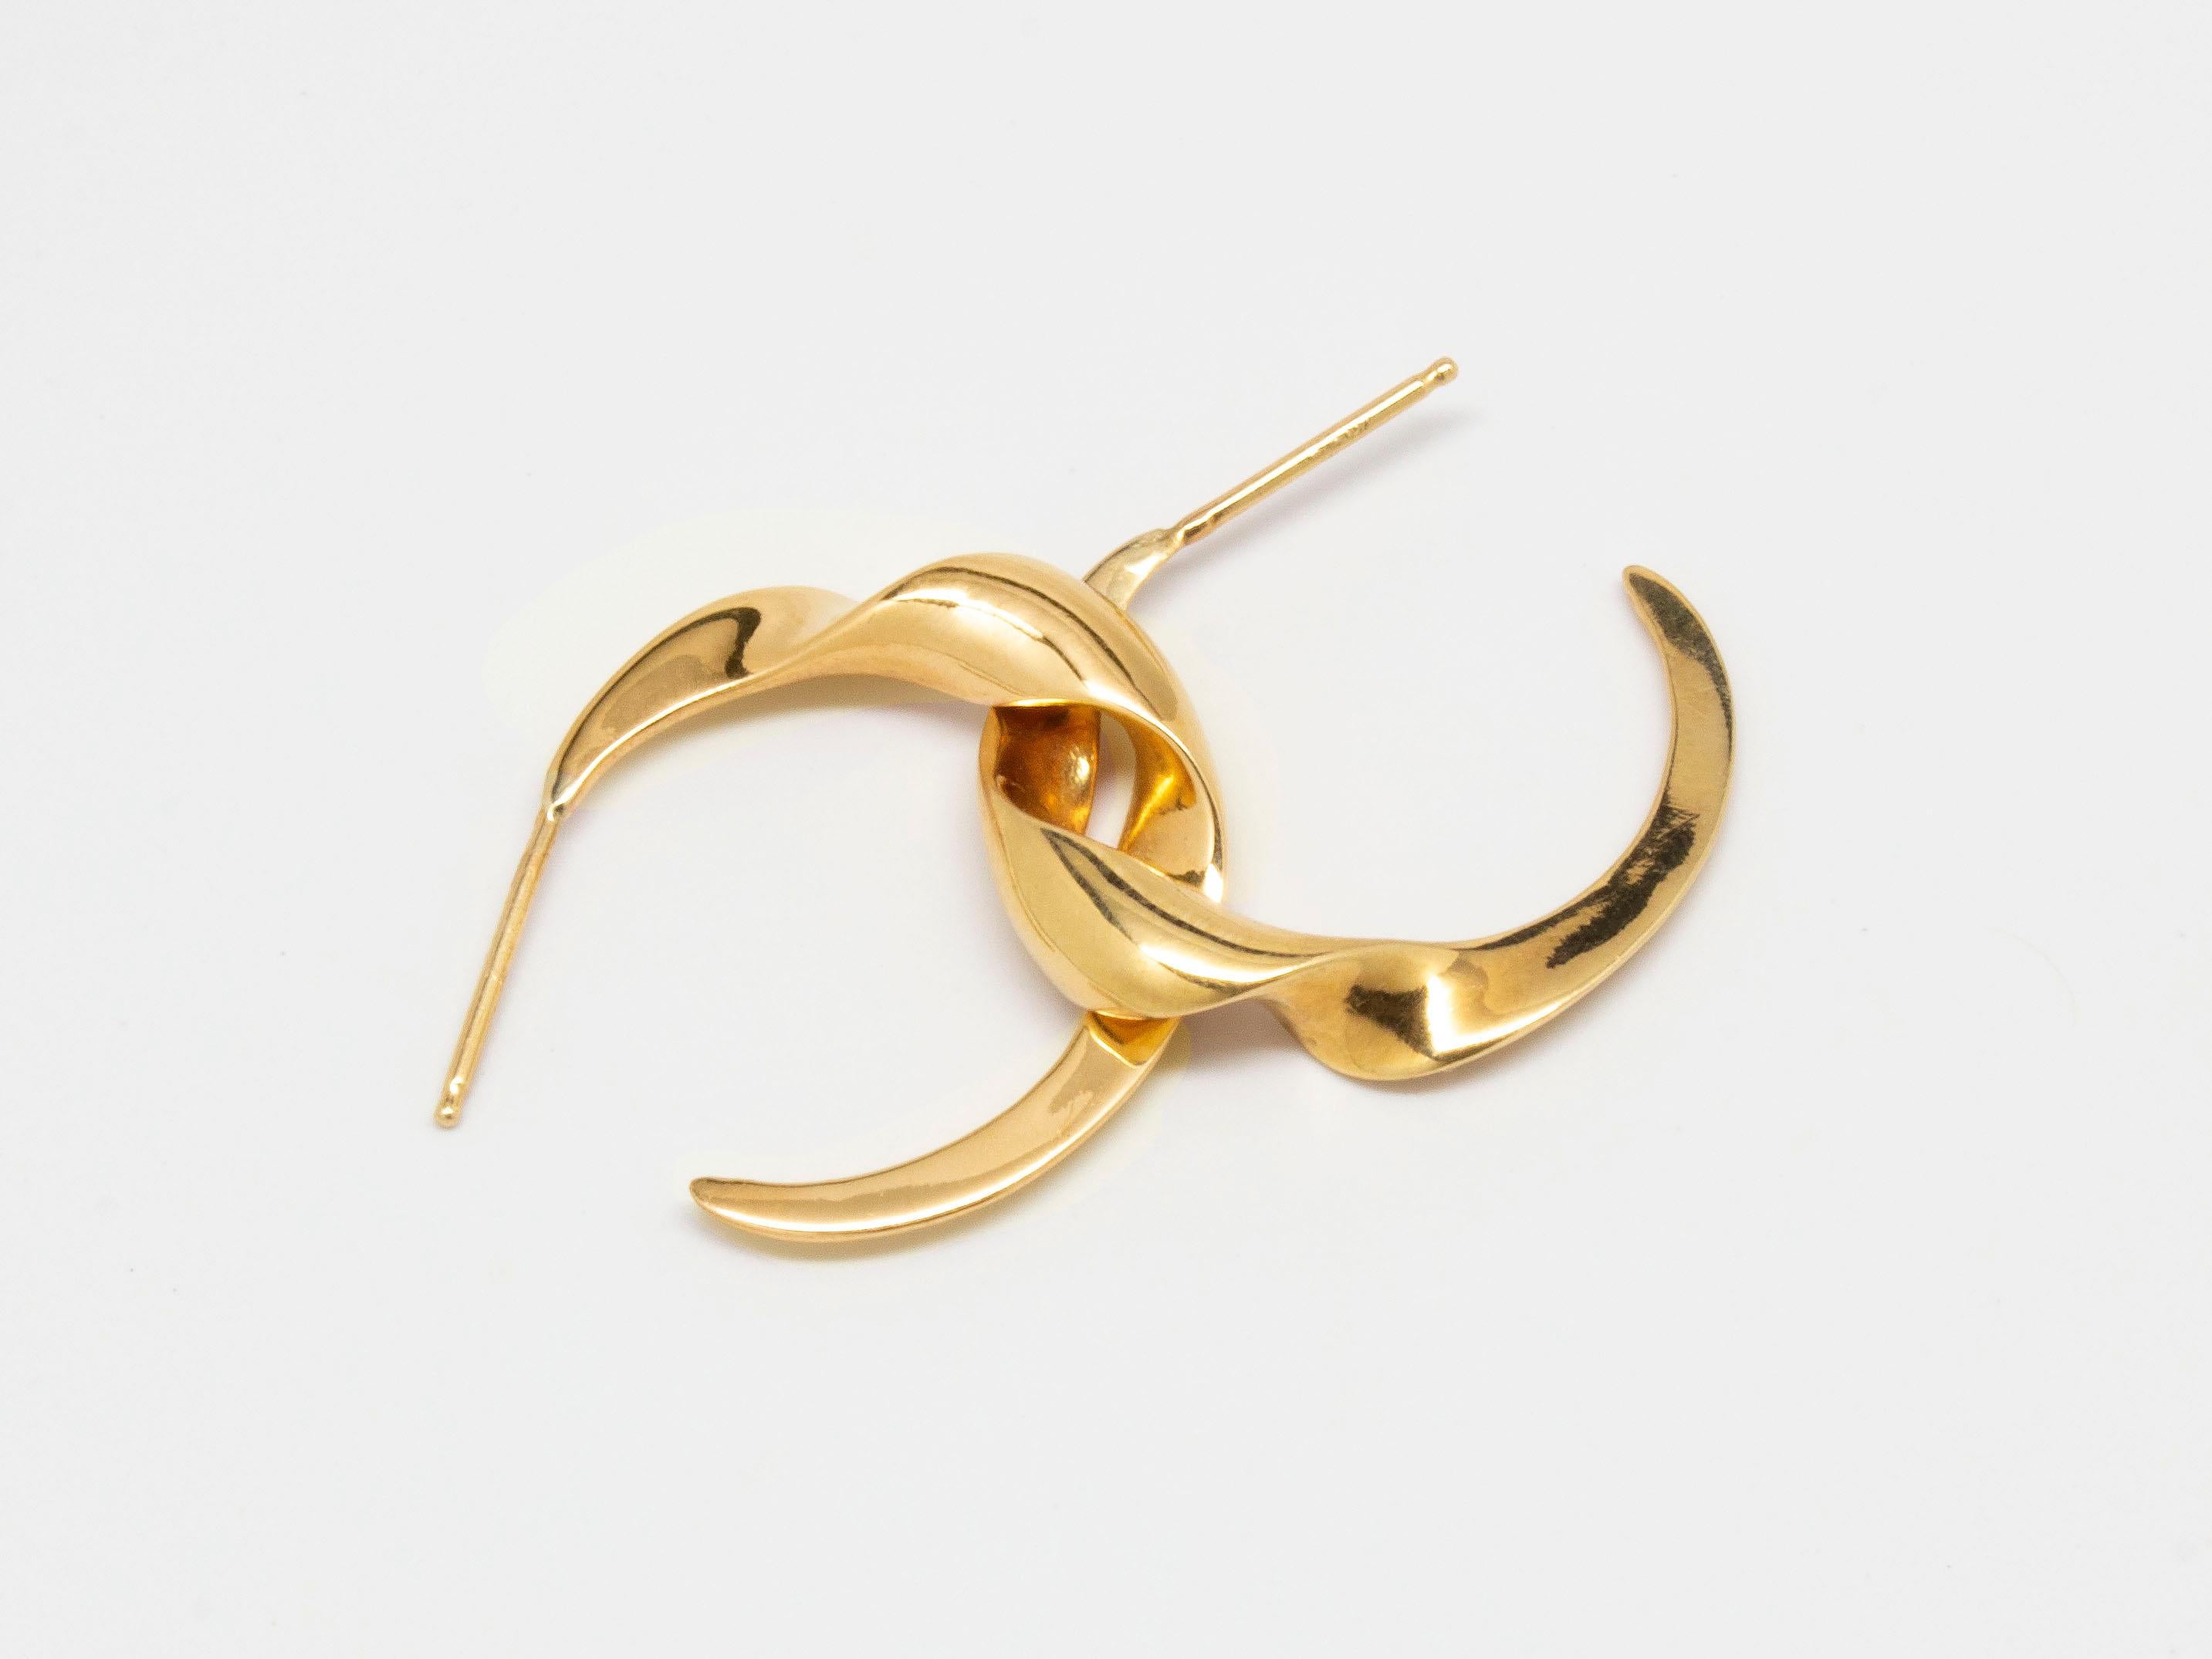 The Swirl Gimmel Hoop Earrings from modern fine jewelry house, Baker & Black. Fun everyday hoops inspired by Baker & Black's beloved Swirl Gimmel Ring. This listing is for all yellow gold hoops, mixed metal photos are for reference.

• measures 22mm